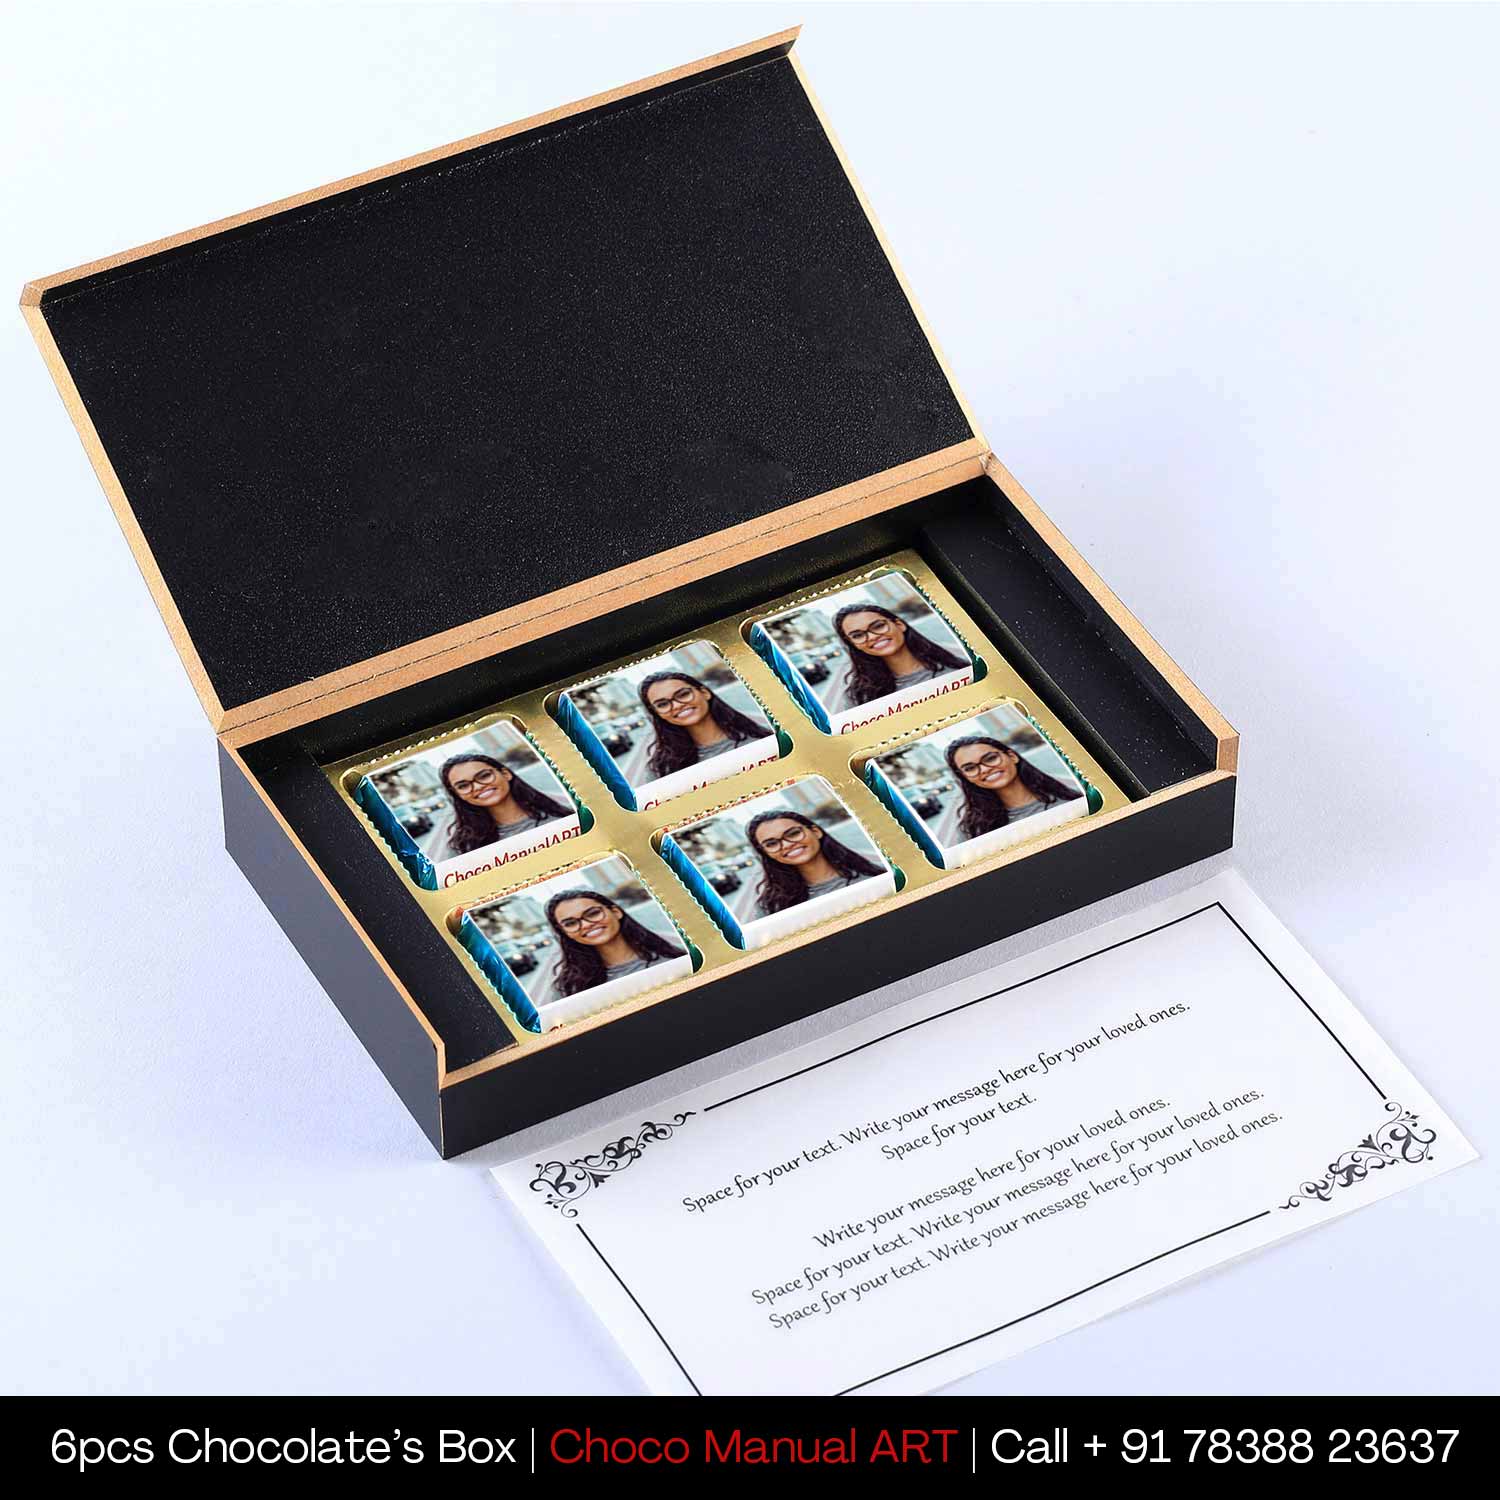 The Customised gifts with the Photo chocolate